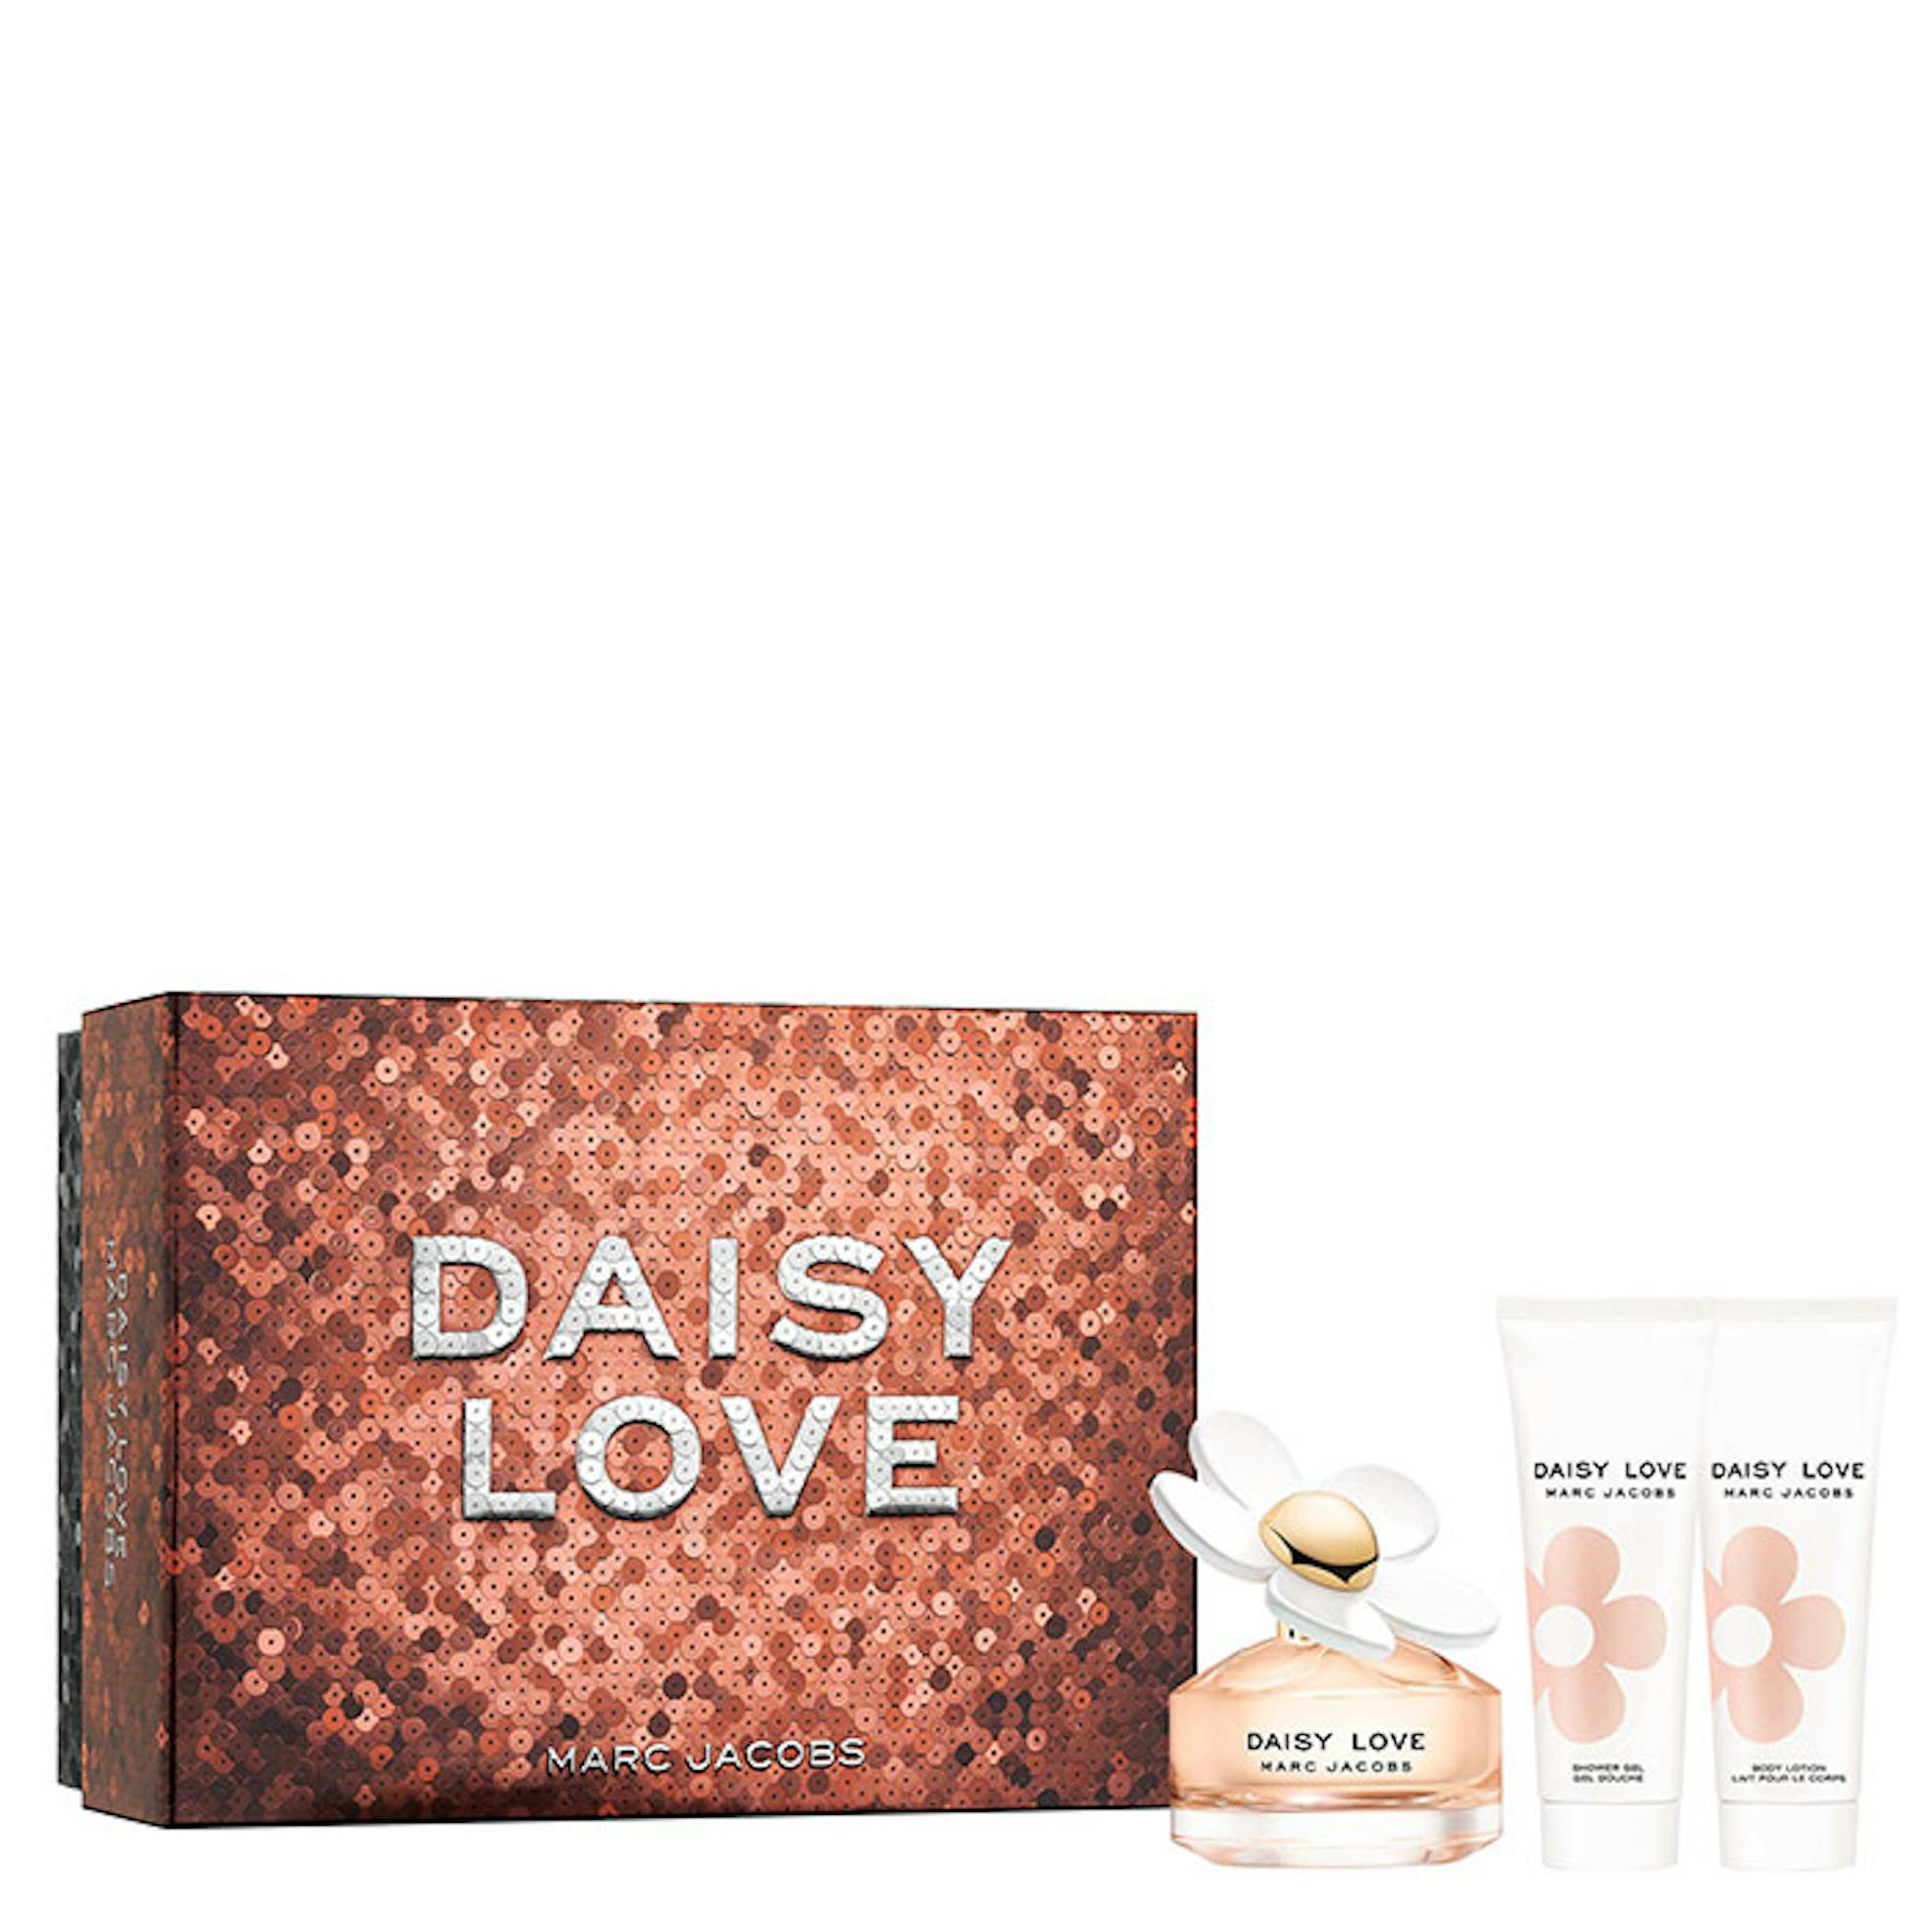  Marc Jacobs Daisy Love 2-Piece Travel Set for Women